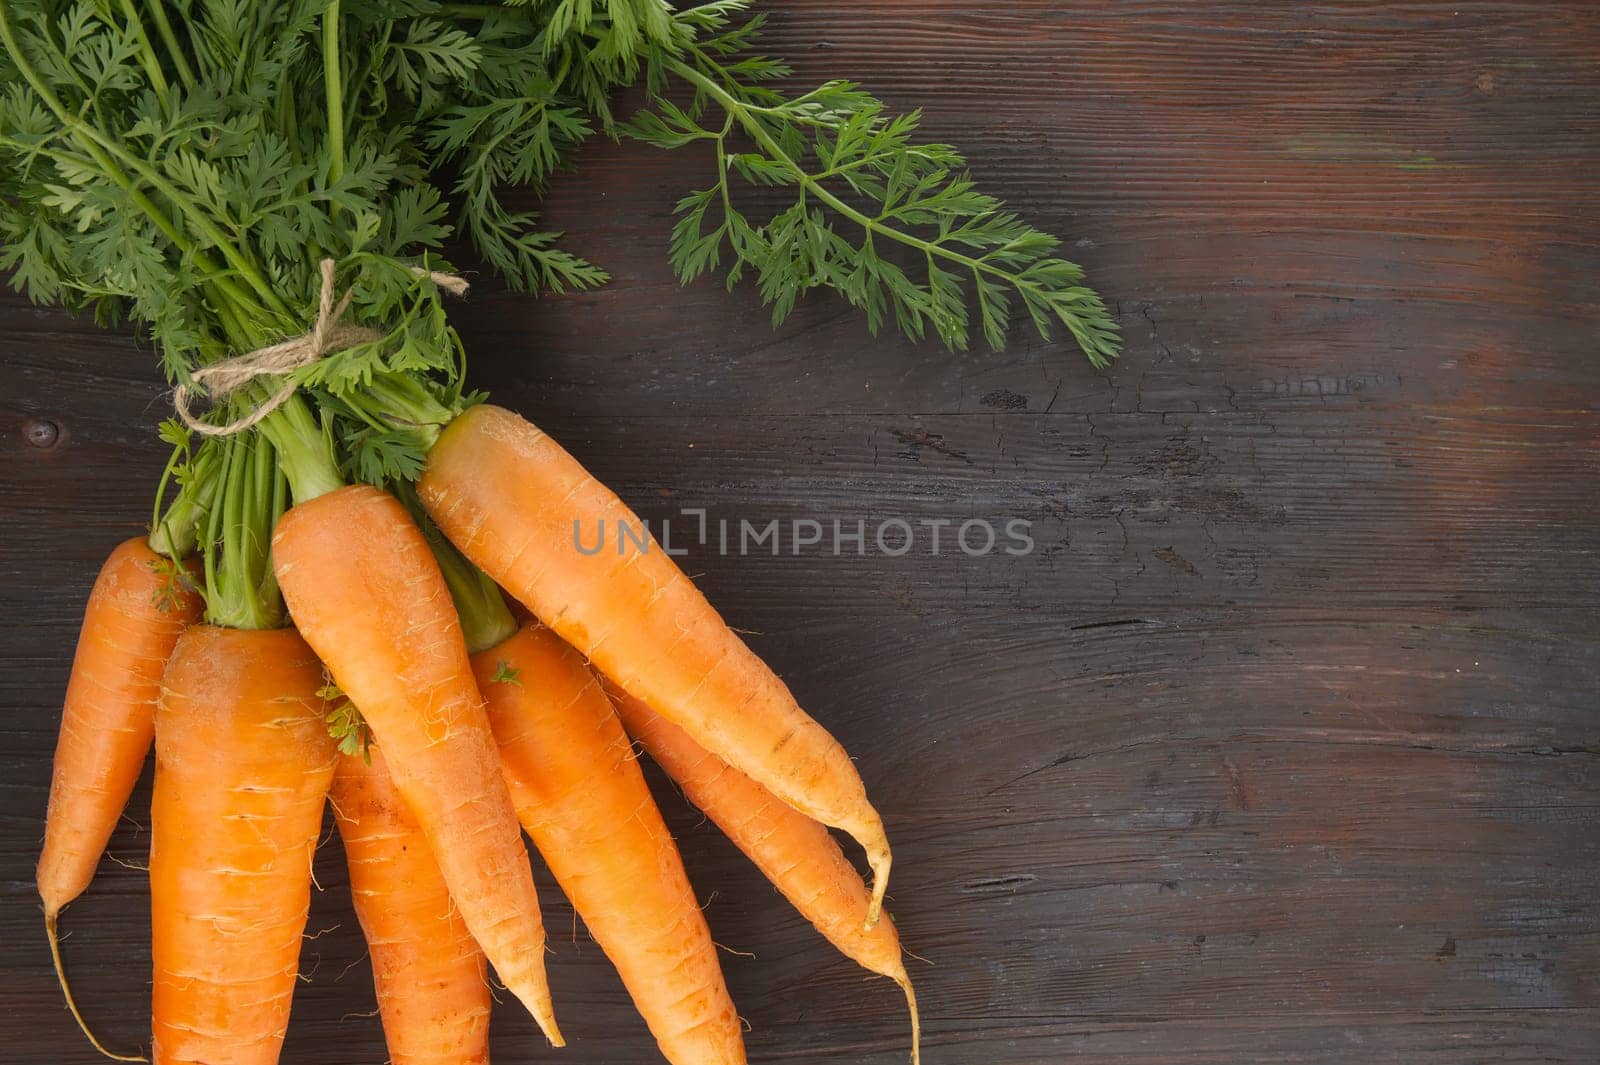 Bundle of fresh, orange carrots with green tops on wooden table by NetPix